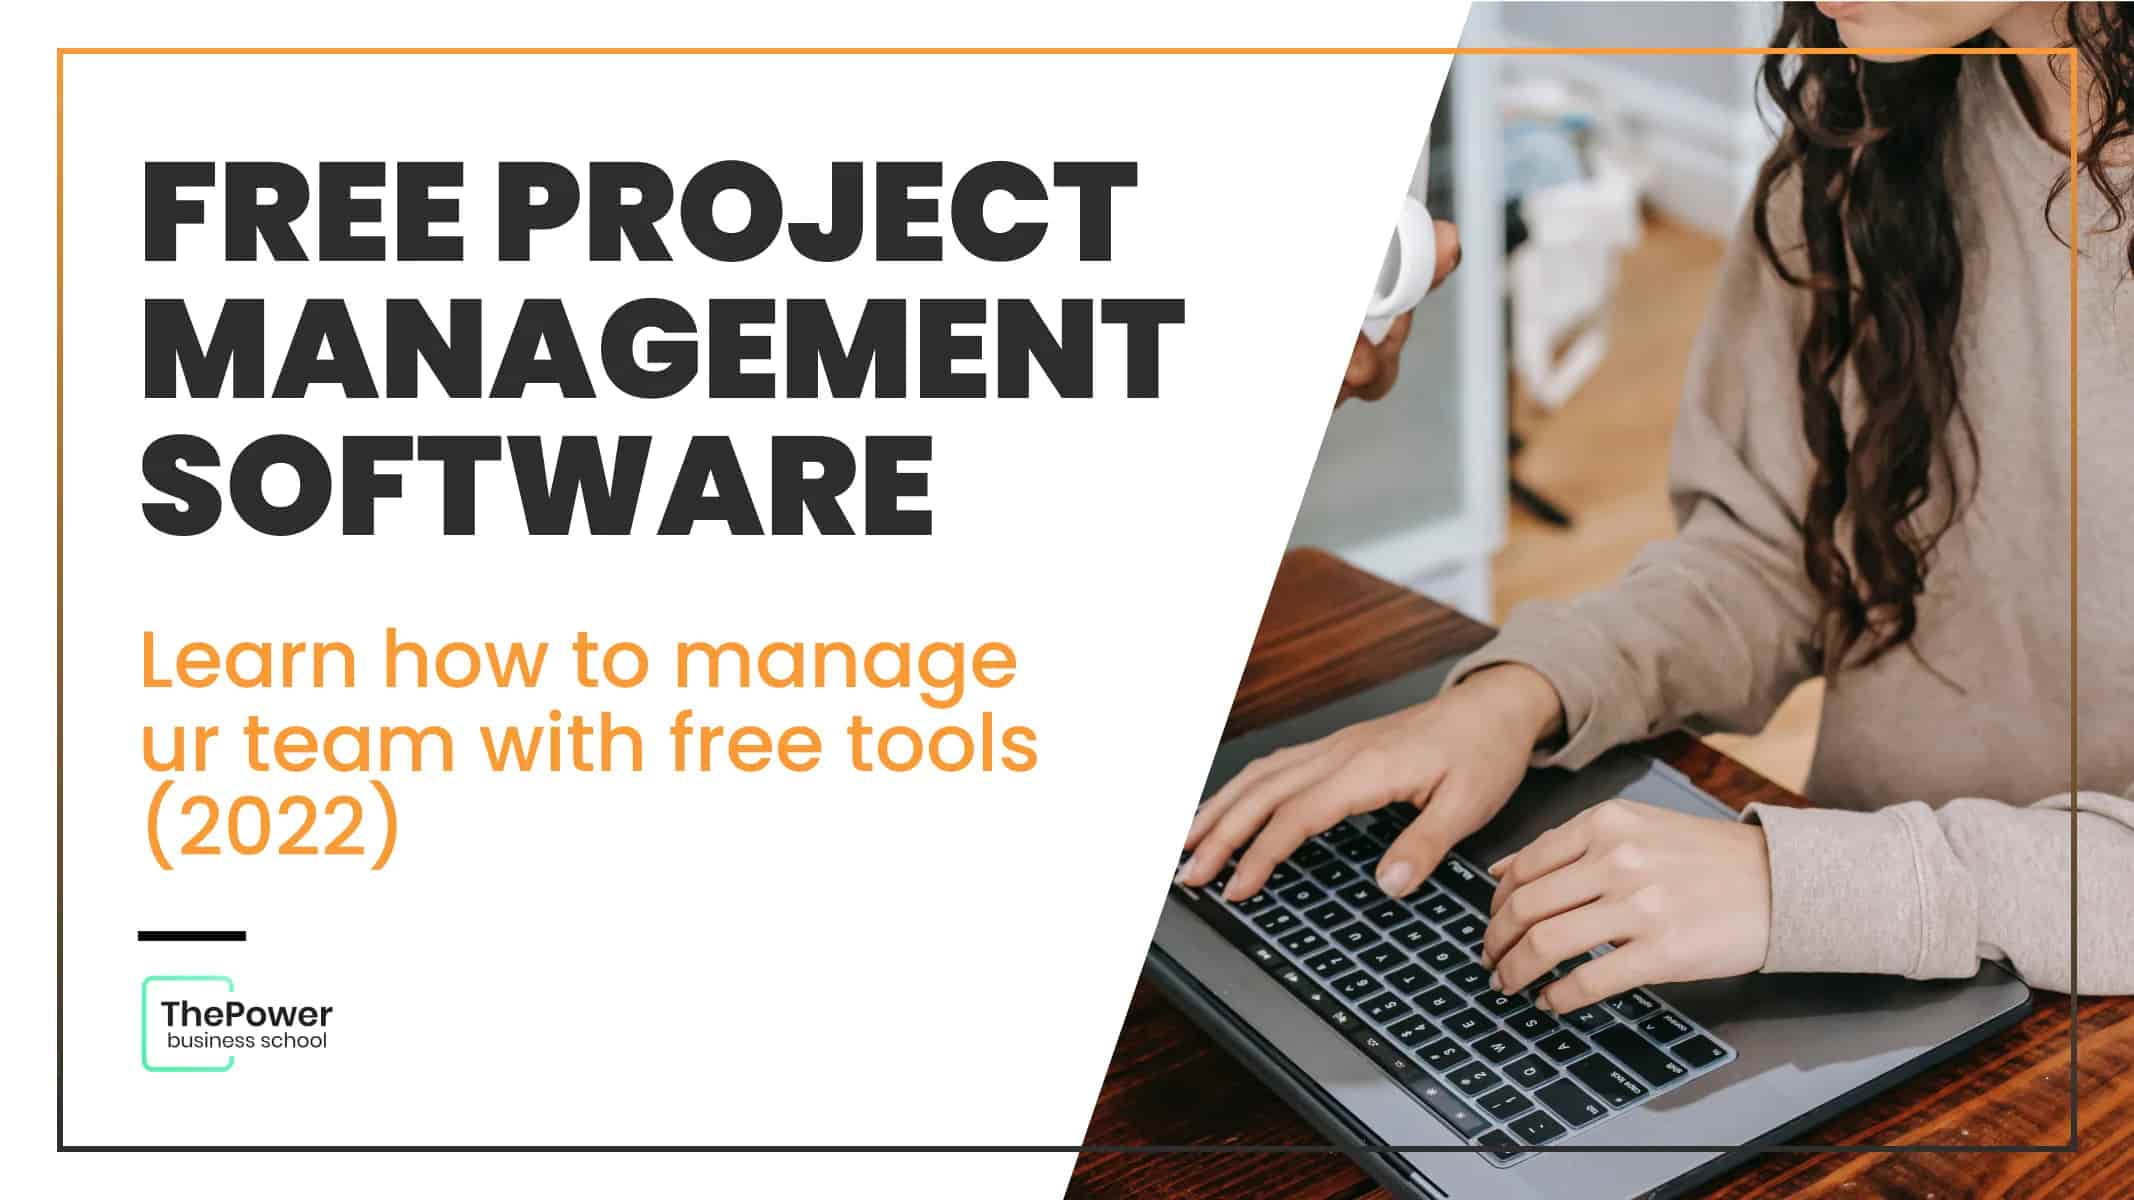 Free project management